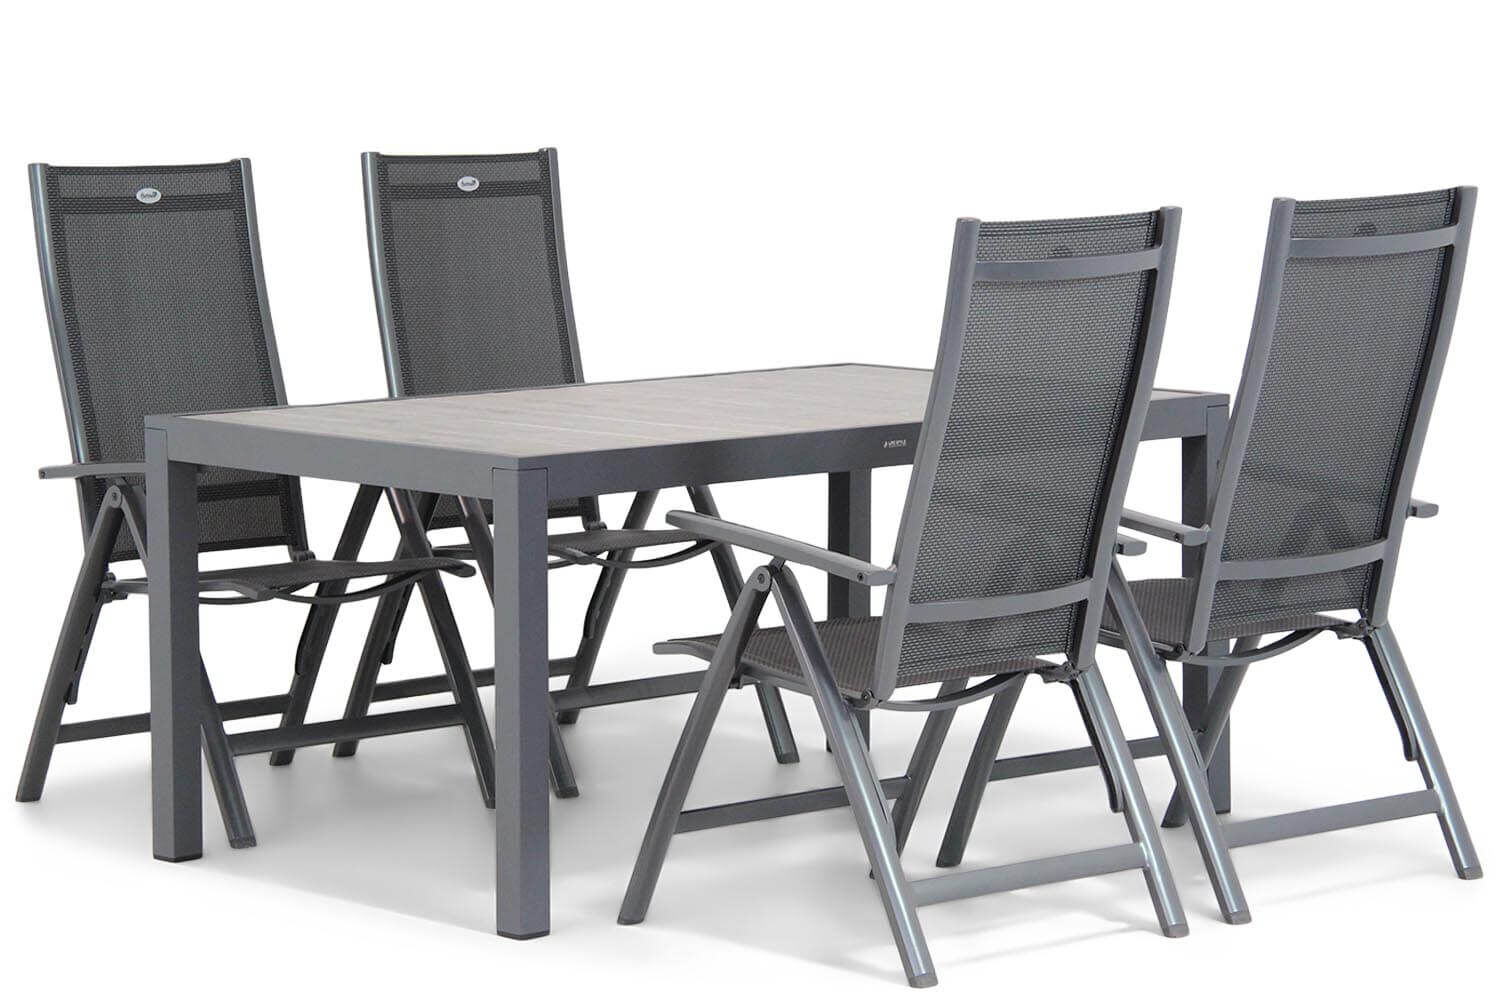 Haven Ongepast wit Hartman Royal Club/Residence 164 cm dining tuinset 5-delig -  Tuinmeubelshop.nl